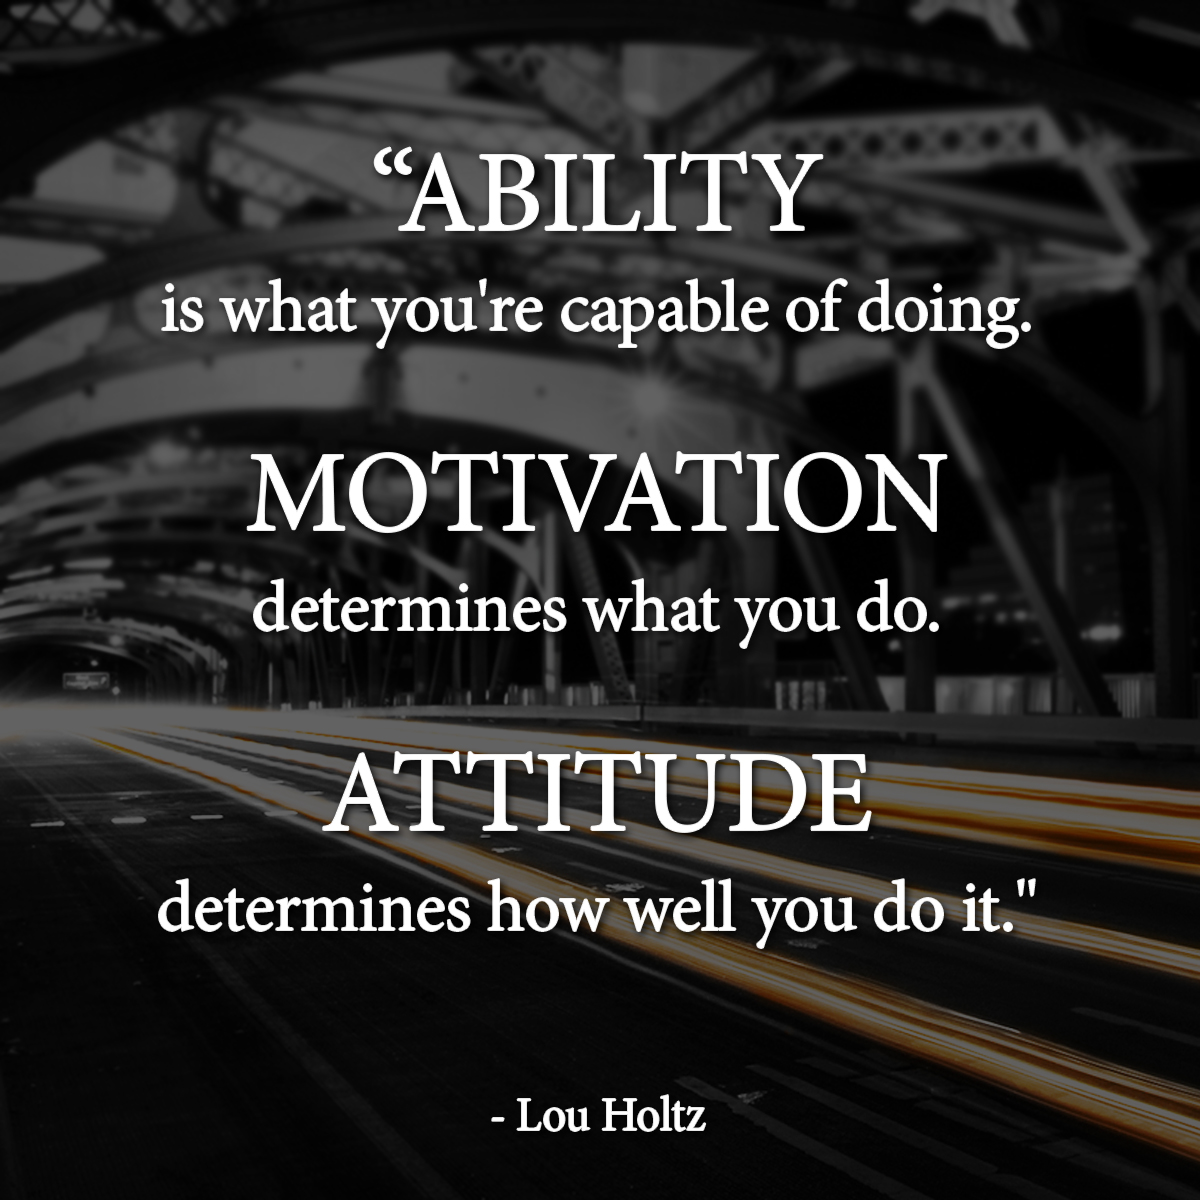 Ability is what you're capable of doing. Motivation determines what you do. Attitude determines how well you do it. Lou Holtz